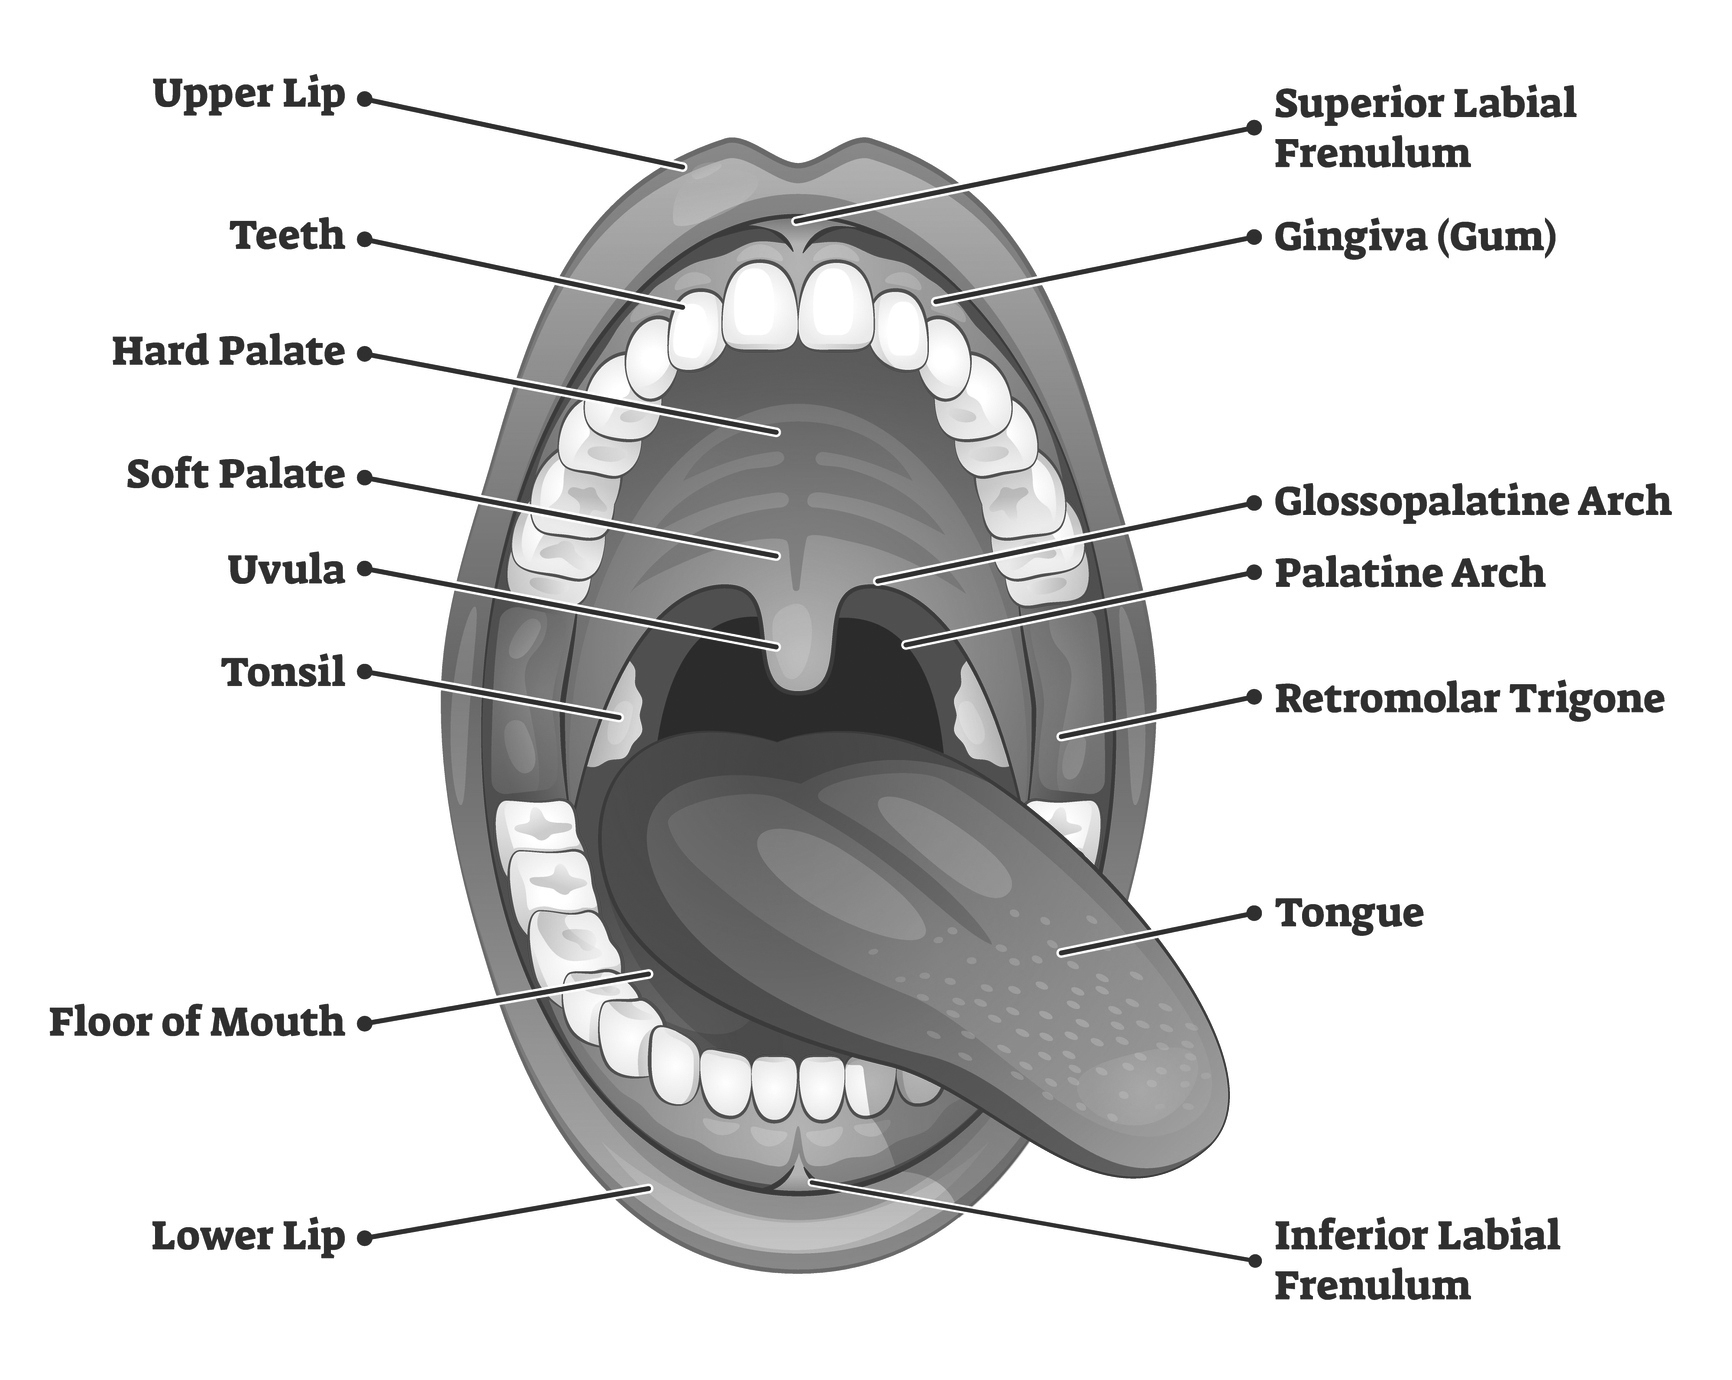 Anatomy of the oral cavity